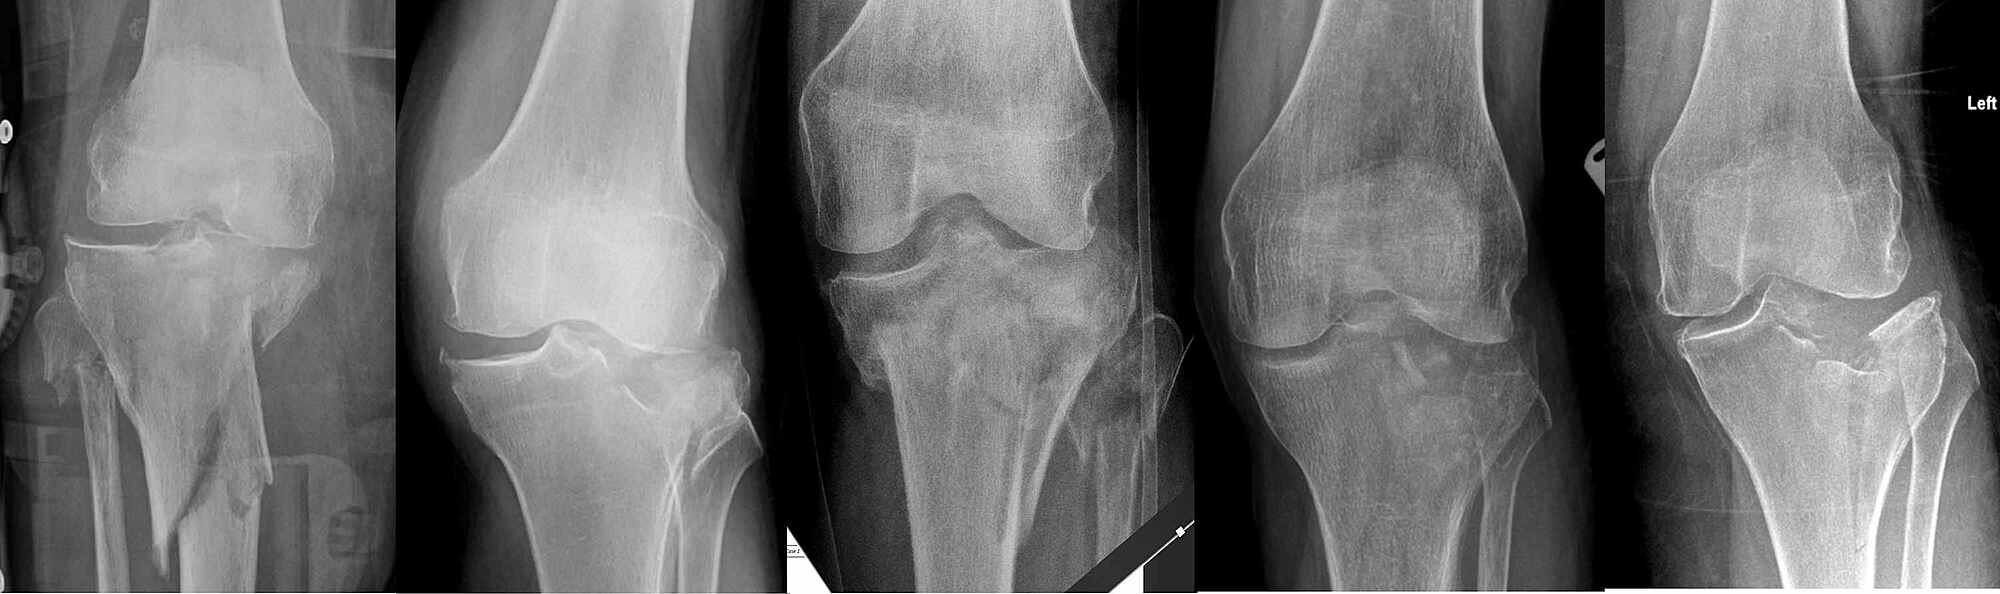 closed fracture tibial plateau